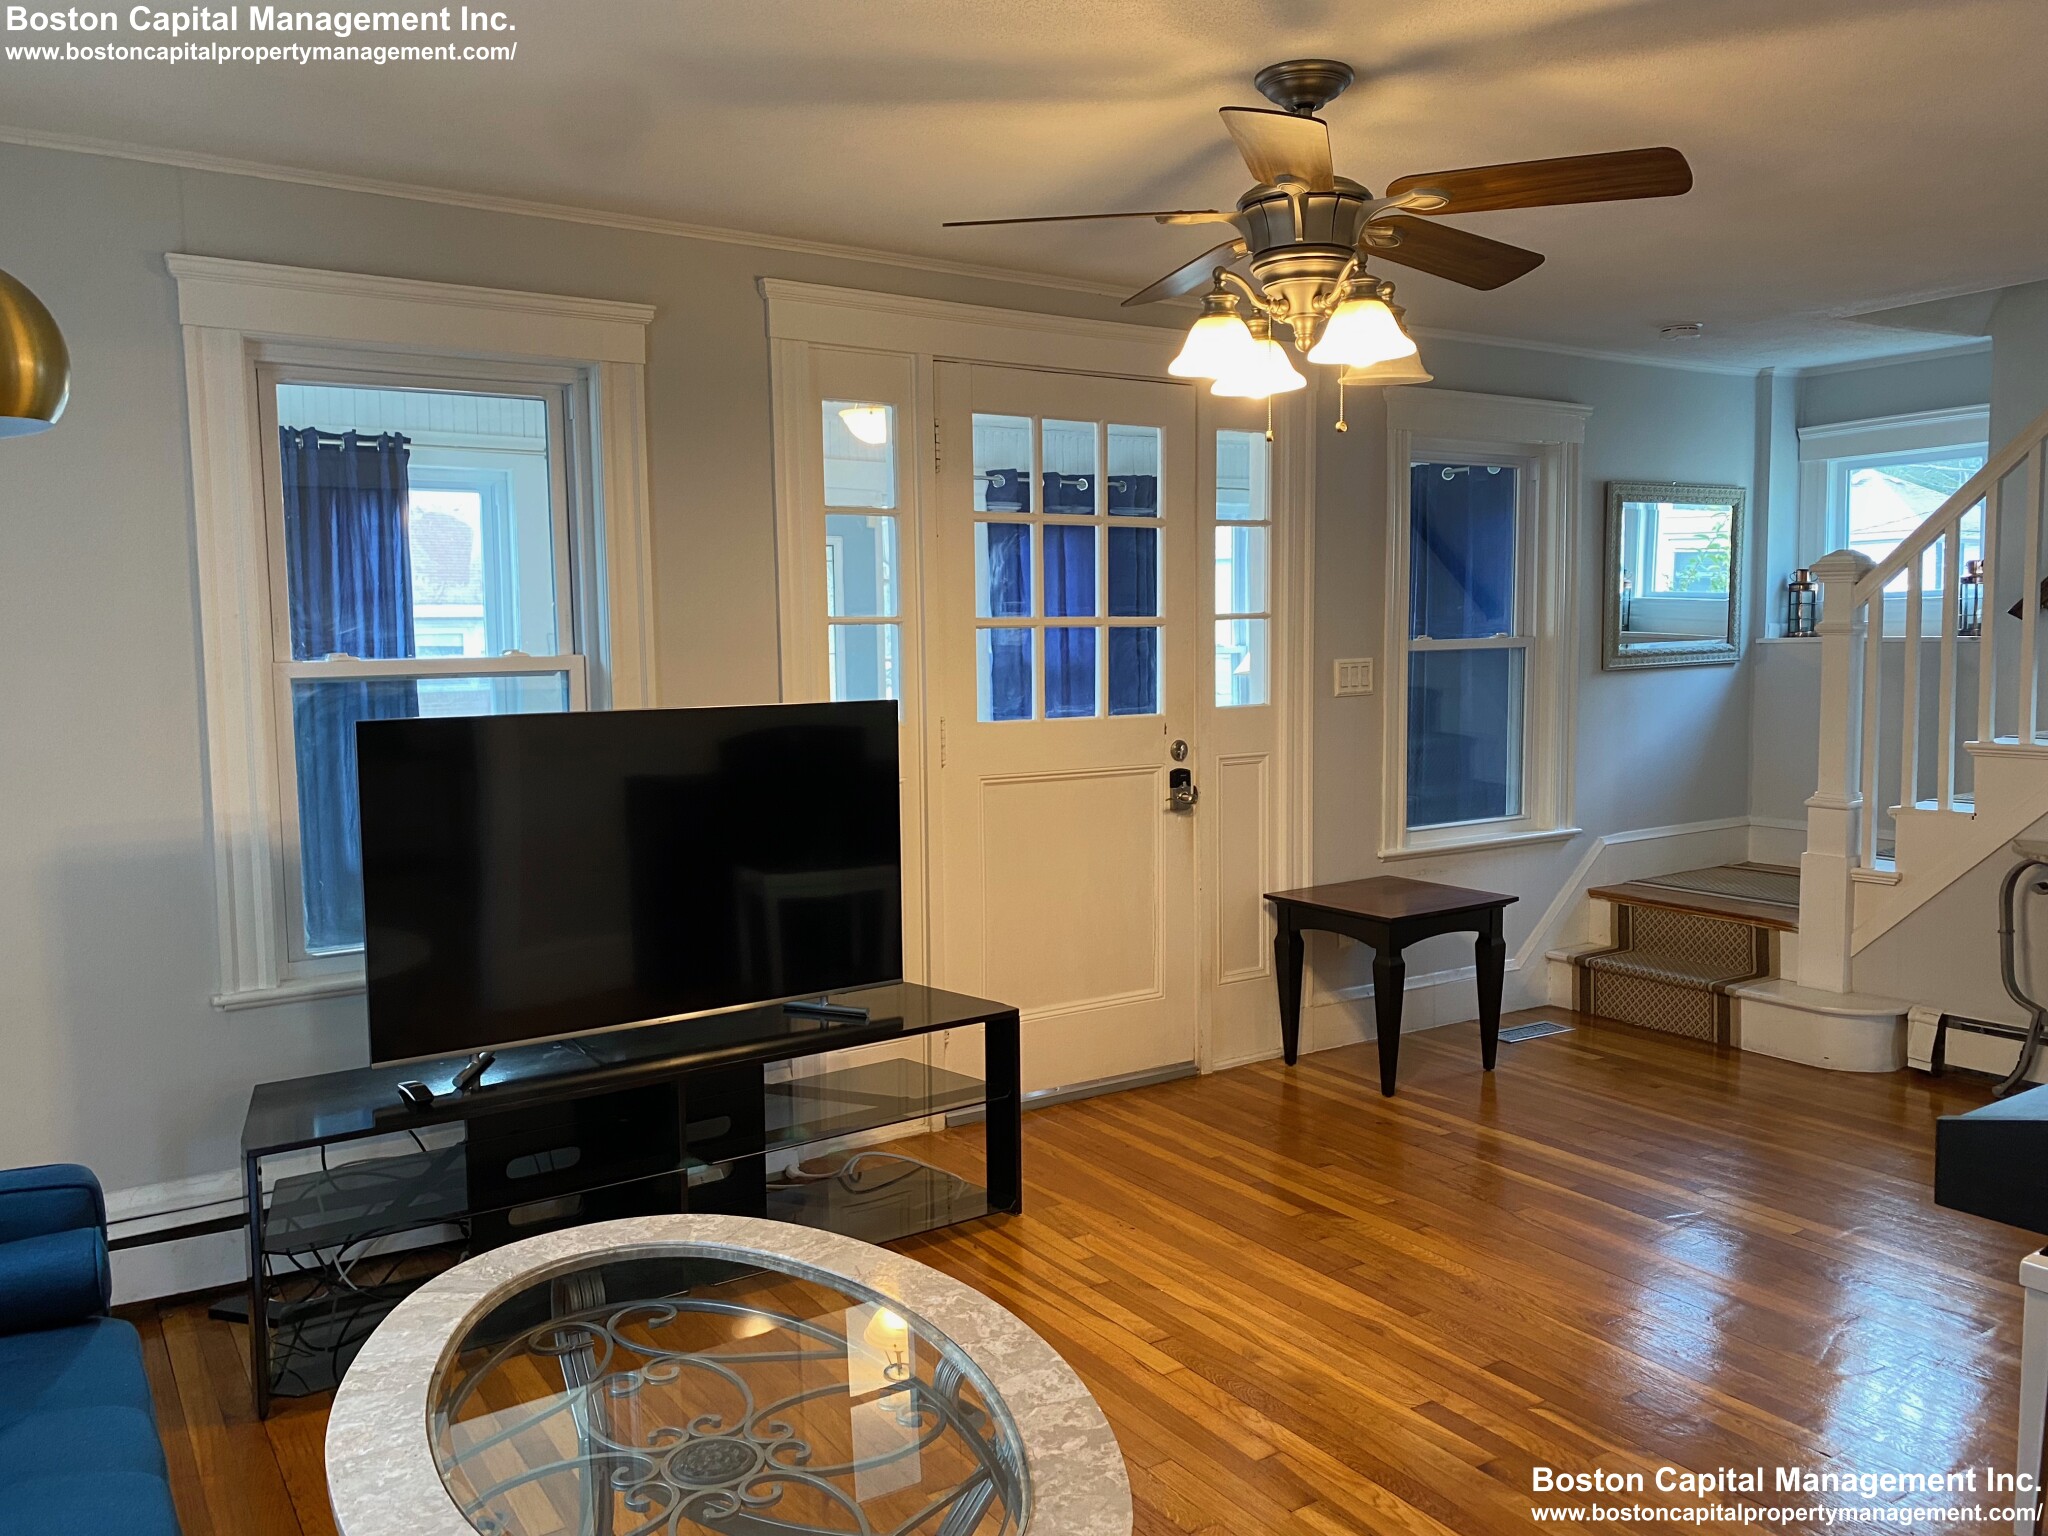 Photos of apartment on Bellvale St.,Malden MA 02148